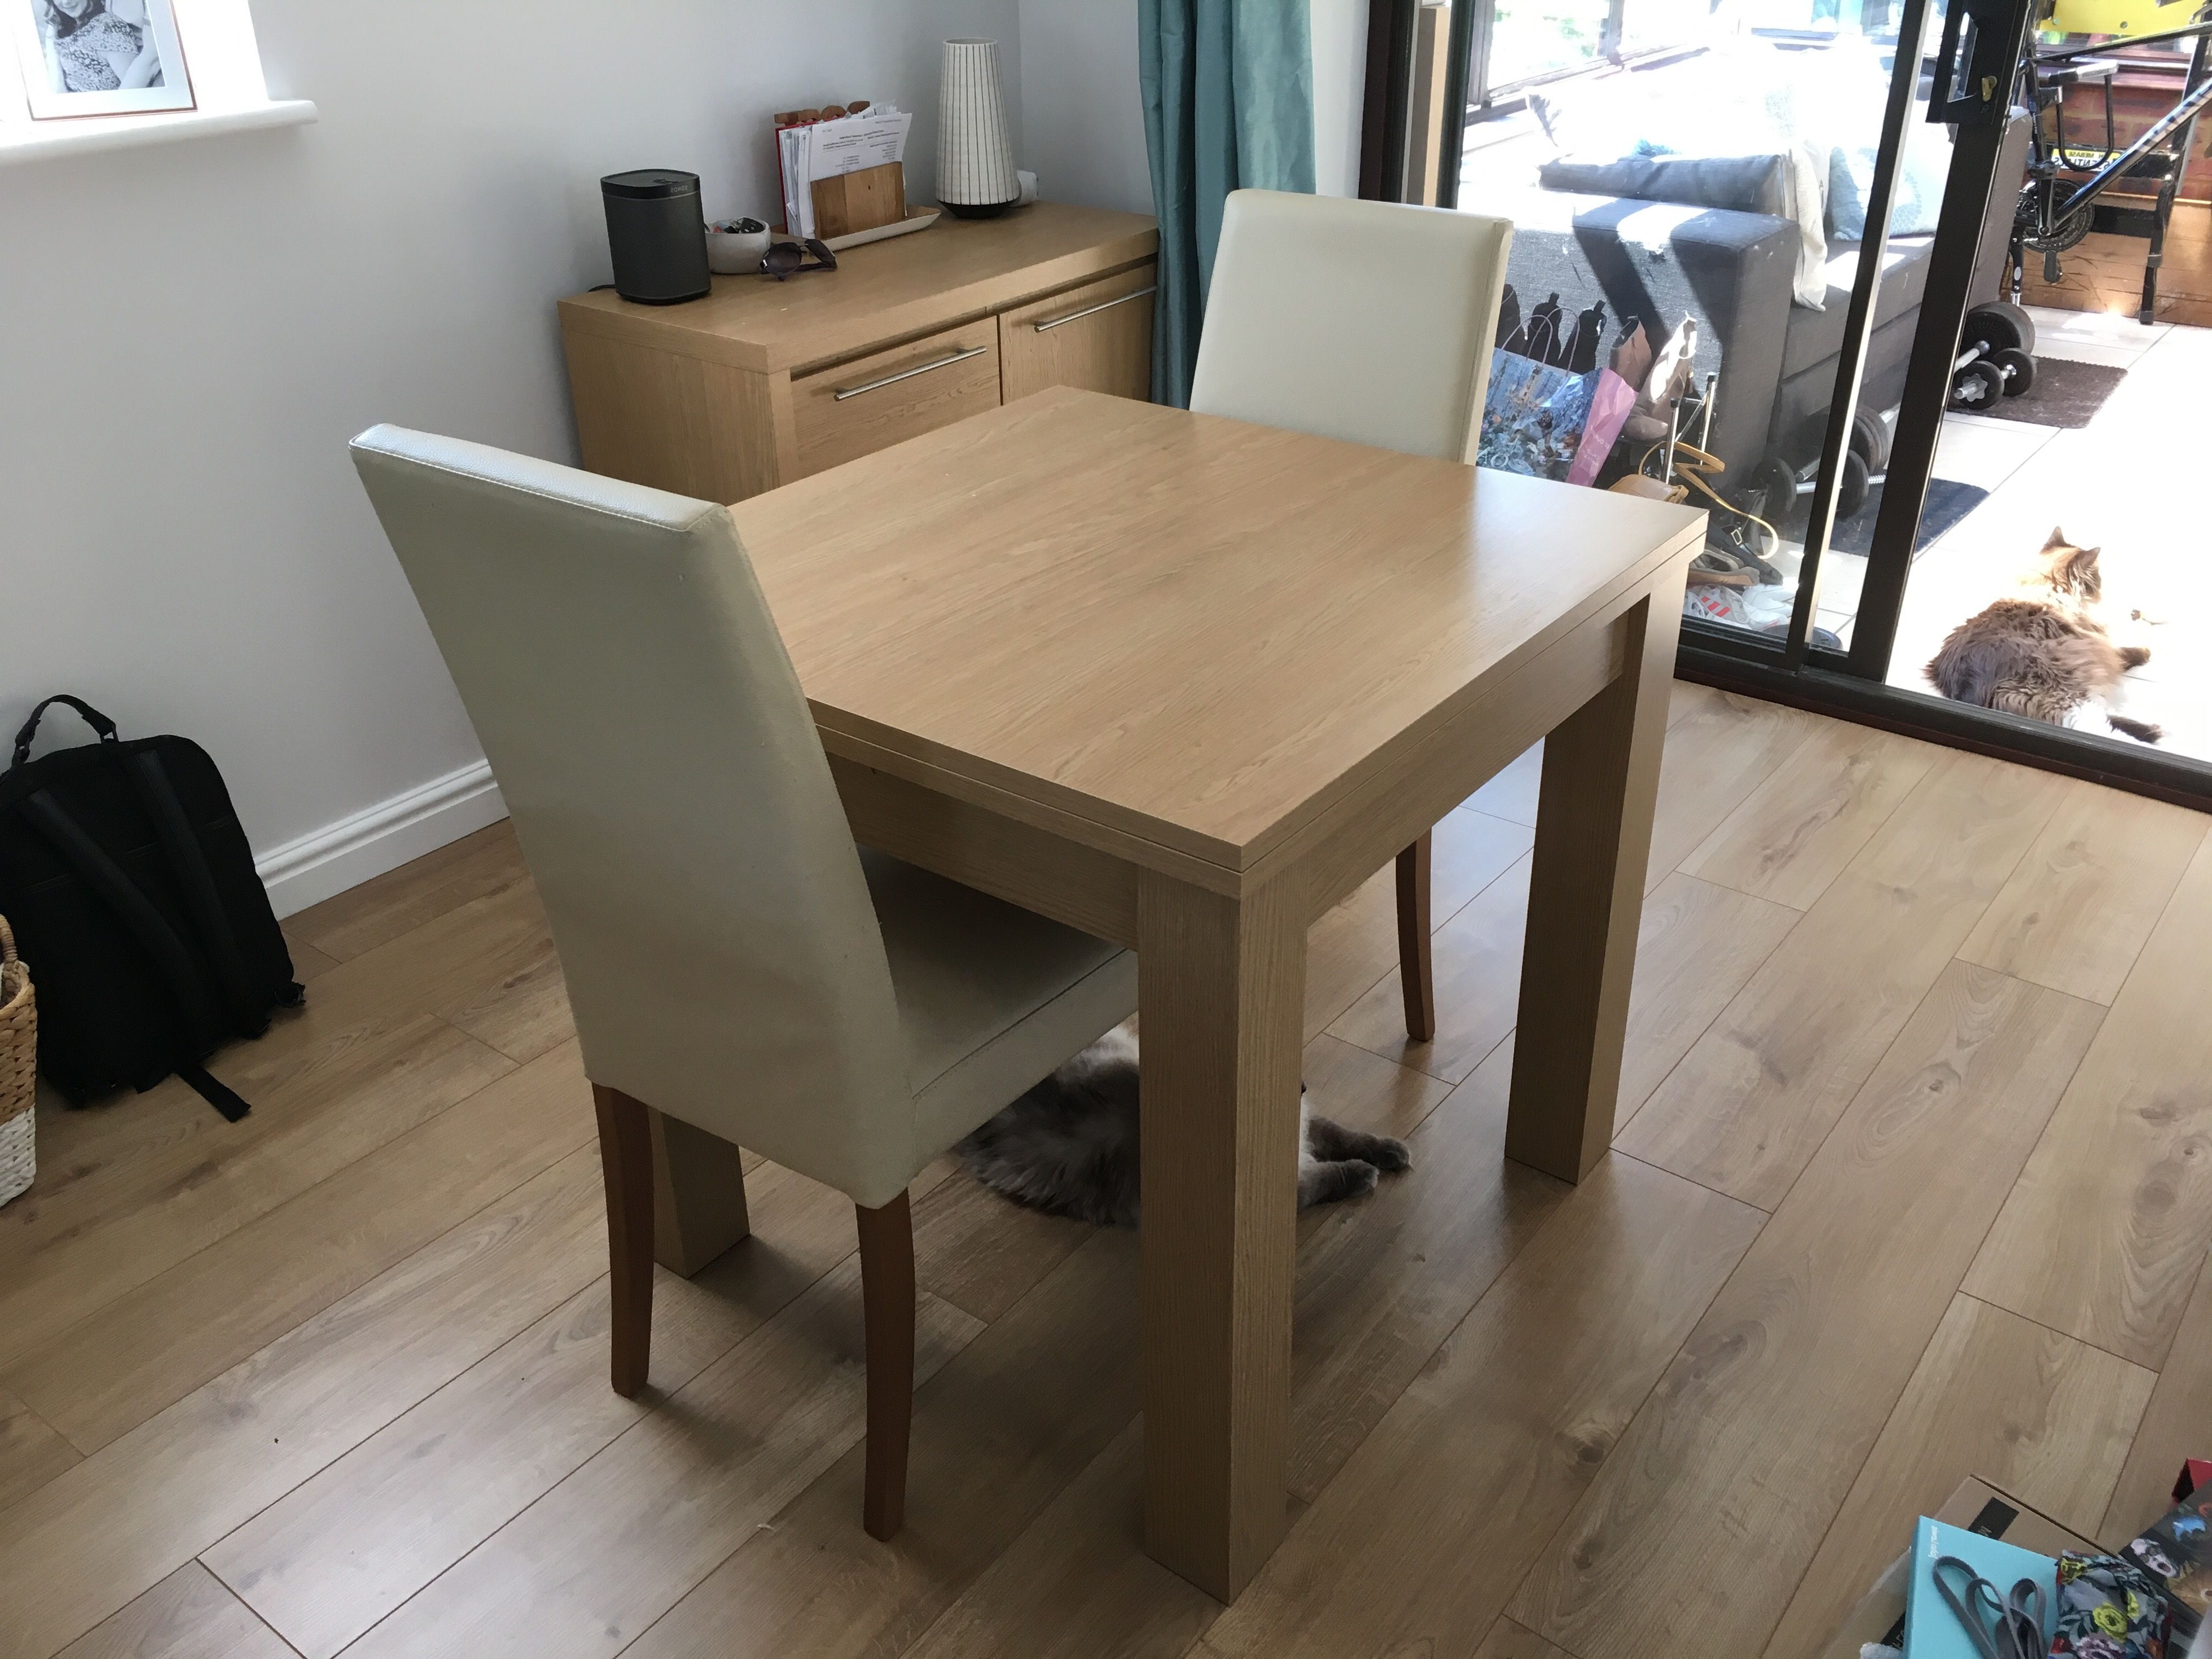 Preferred New Dining Furniture From John Lewis' Alba Range (review) (View 3 of 20)